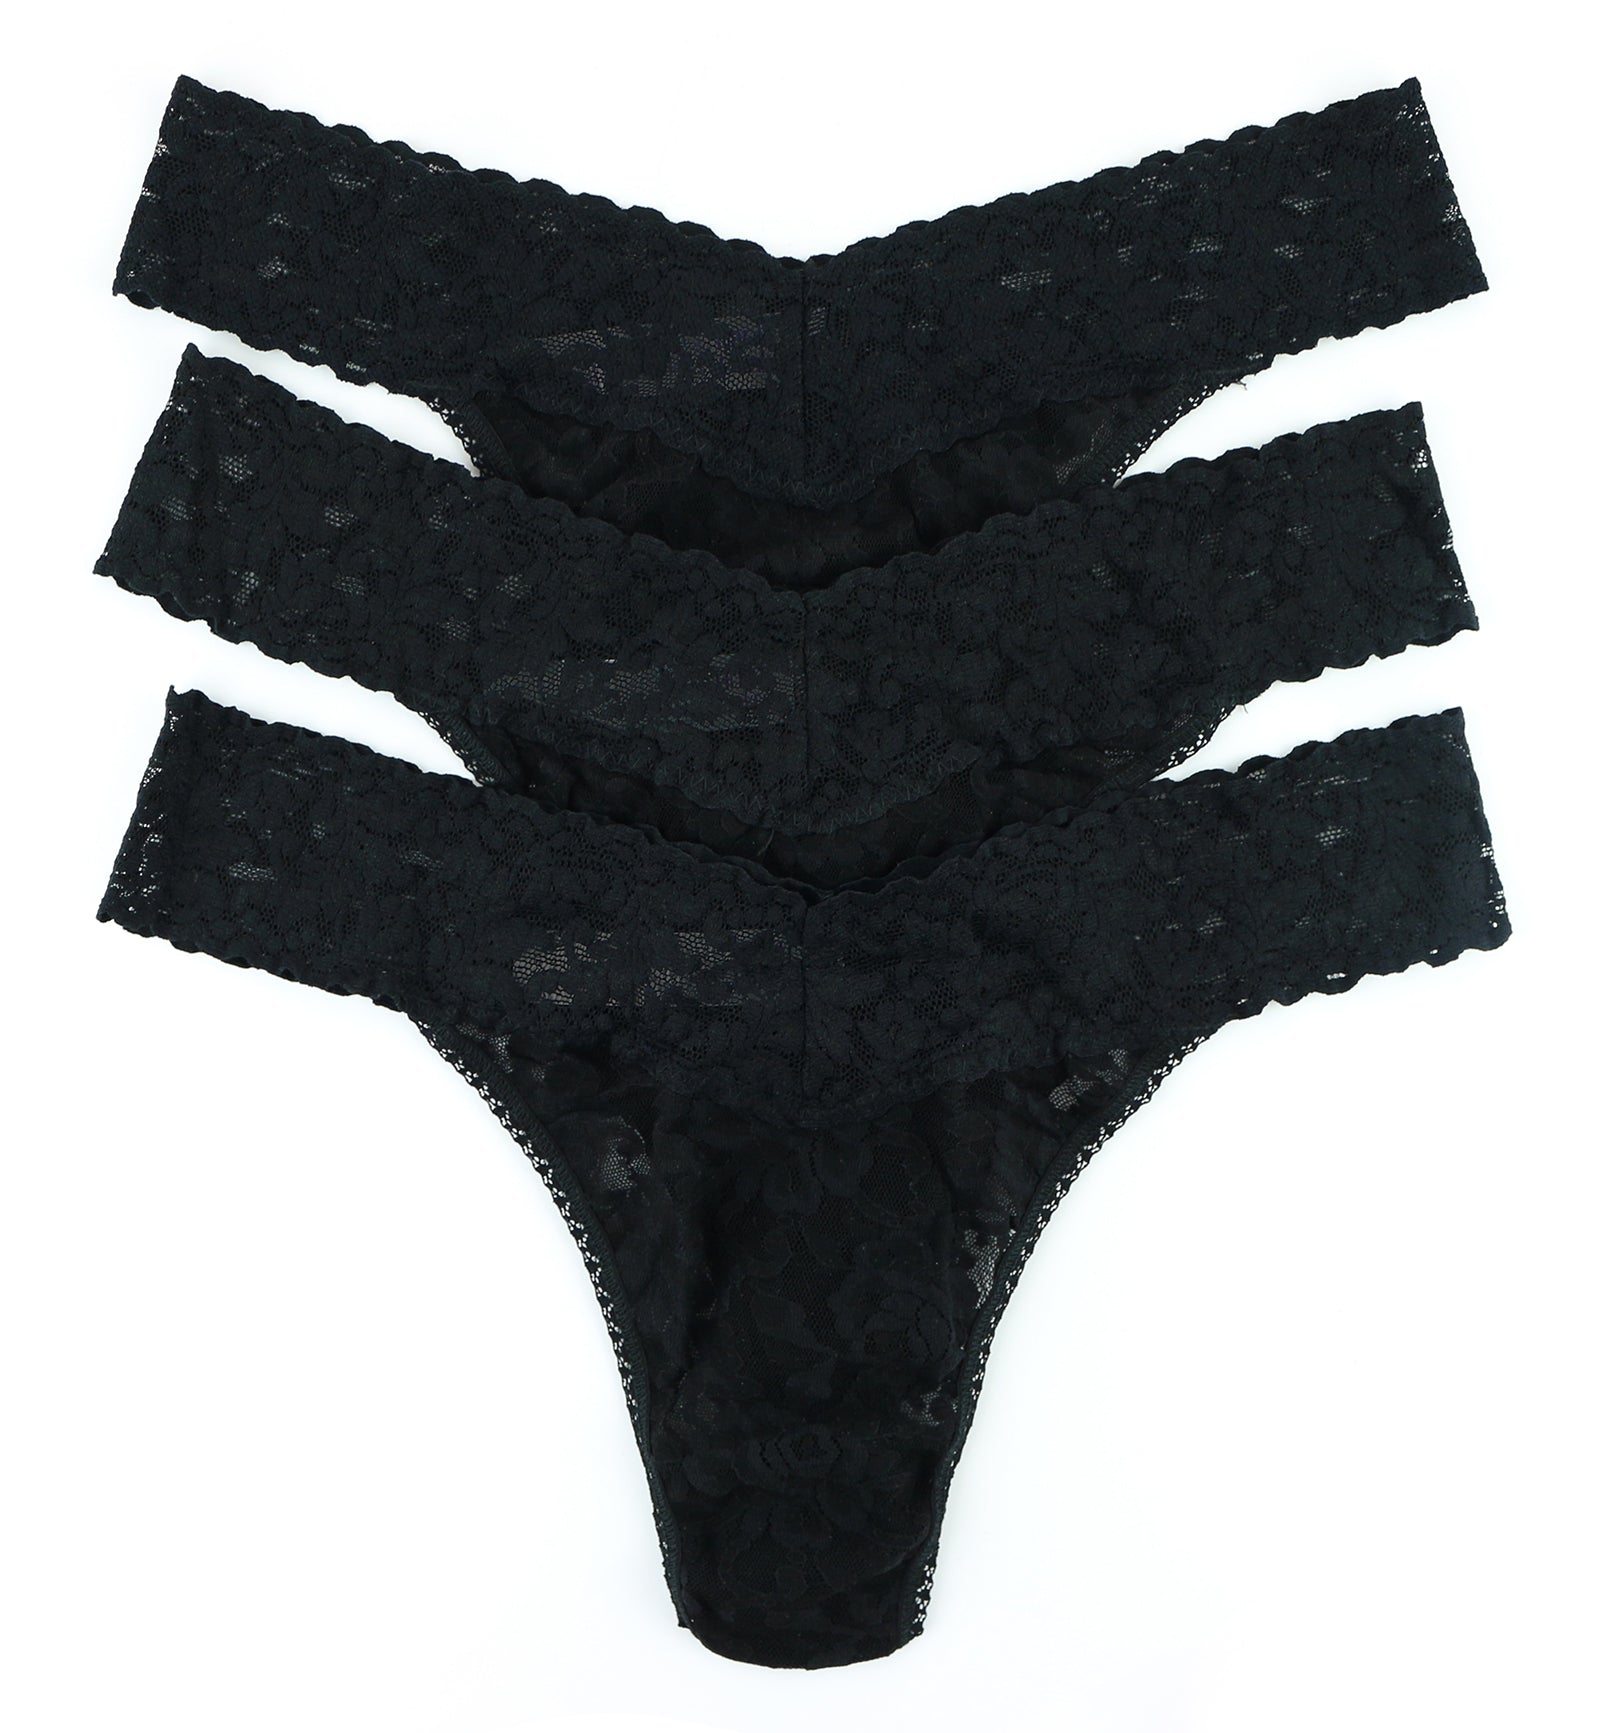 Hanky Panky 3-PACK Signature Lace Original Rise Thong (48113PK),All Black - All Black,One Size